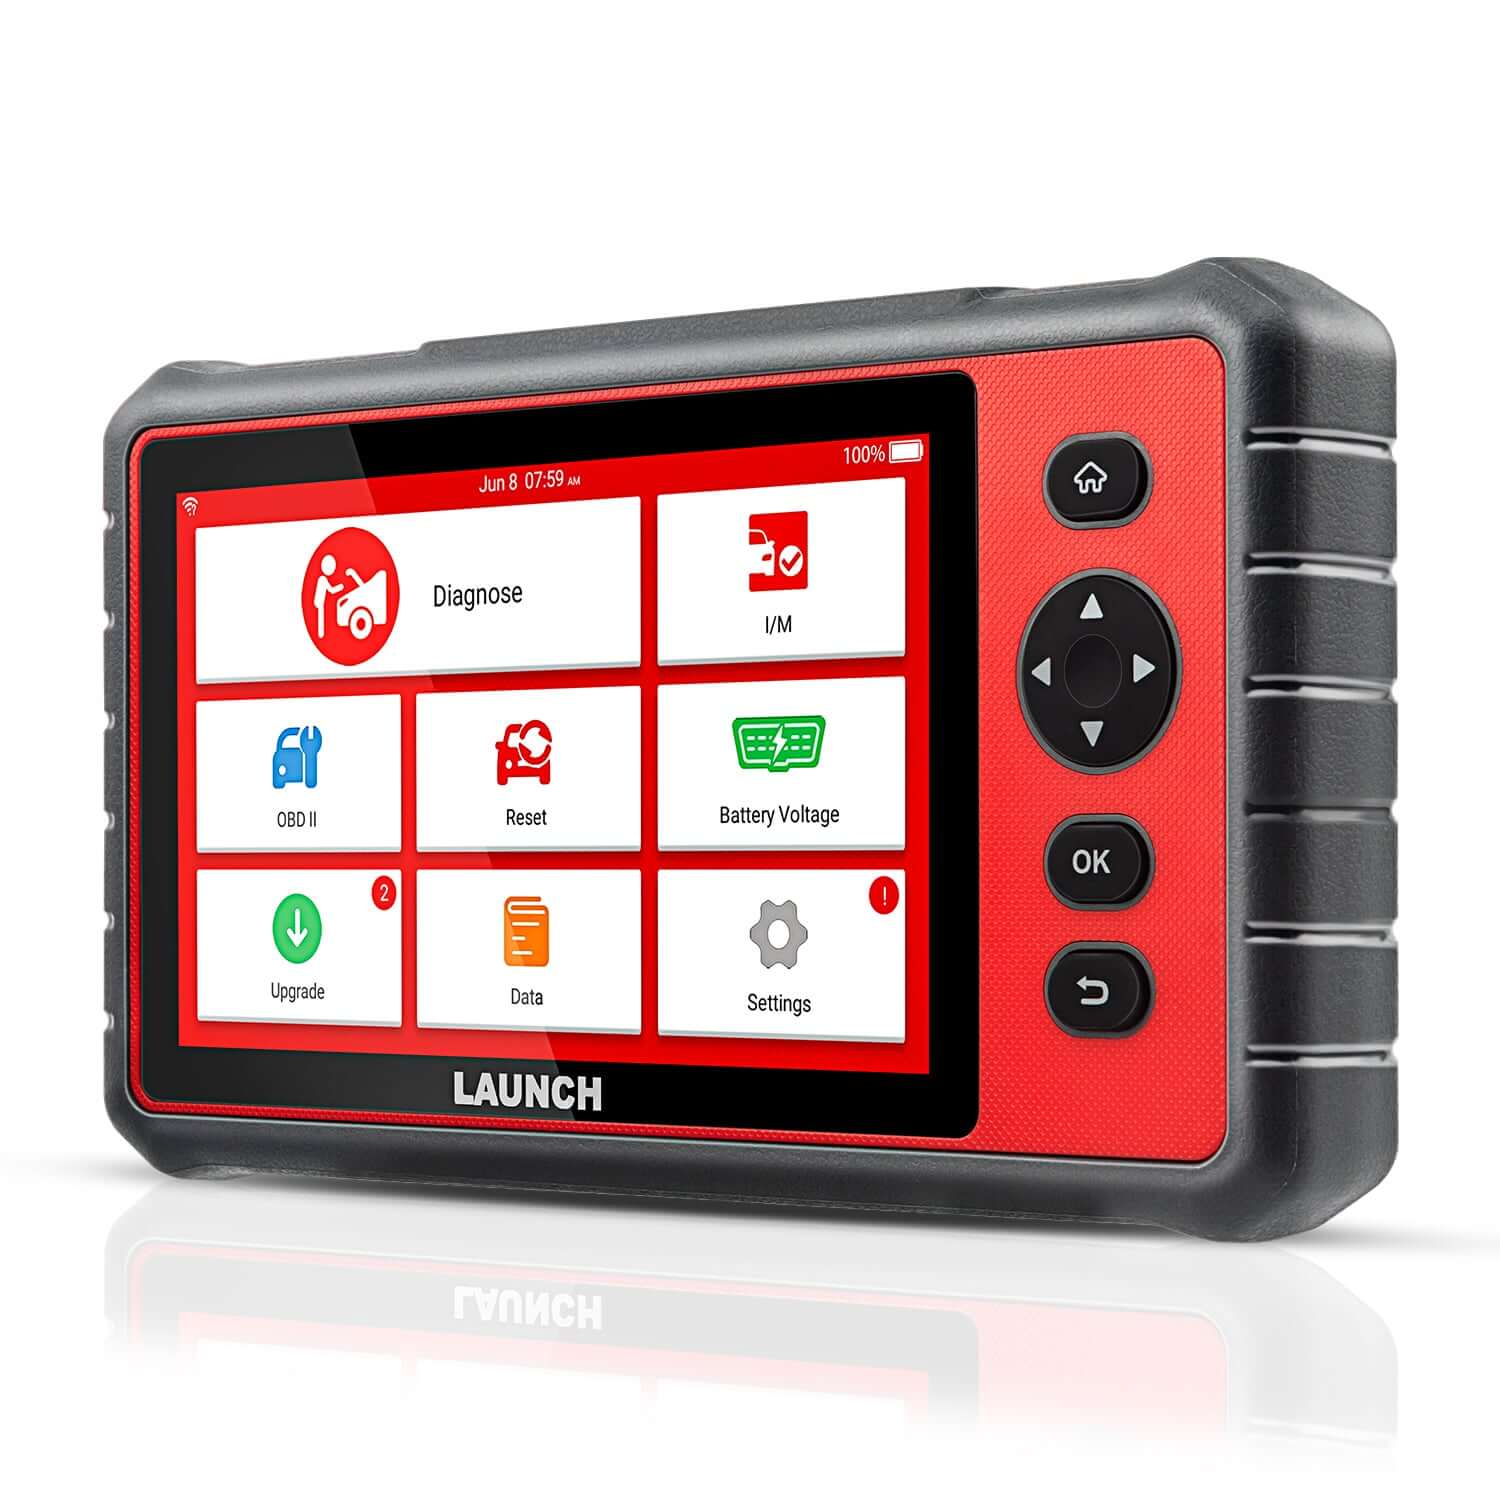 LAUNCH CRP909E All System OBD2 Sanner with 28 Reset Function